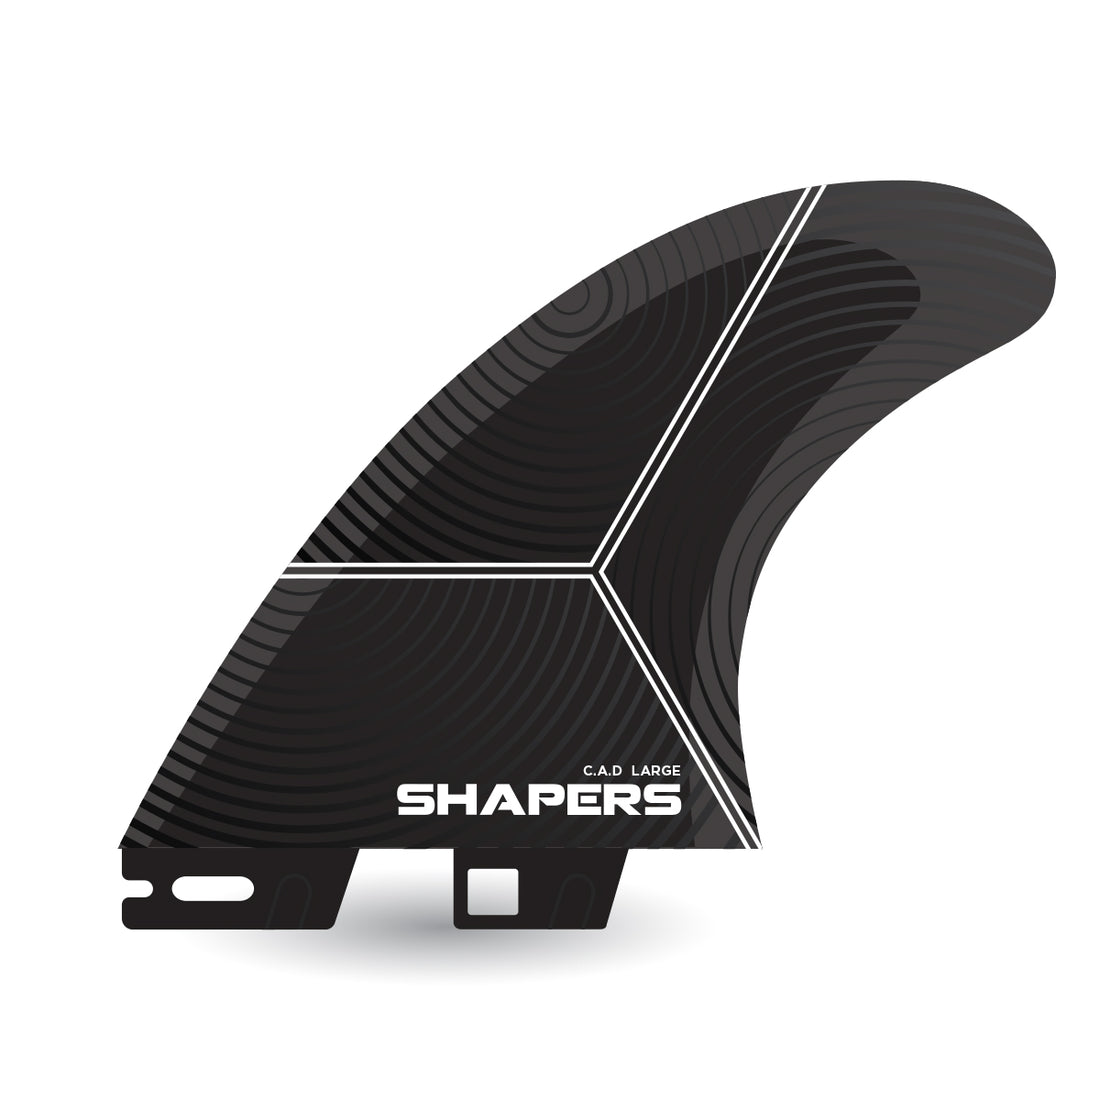 SHAPERS C.A.D LARGE 3-FIN SHAPERS 2 BASE